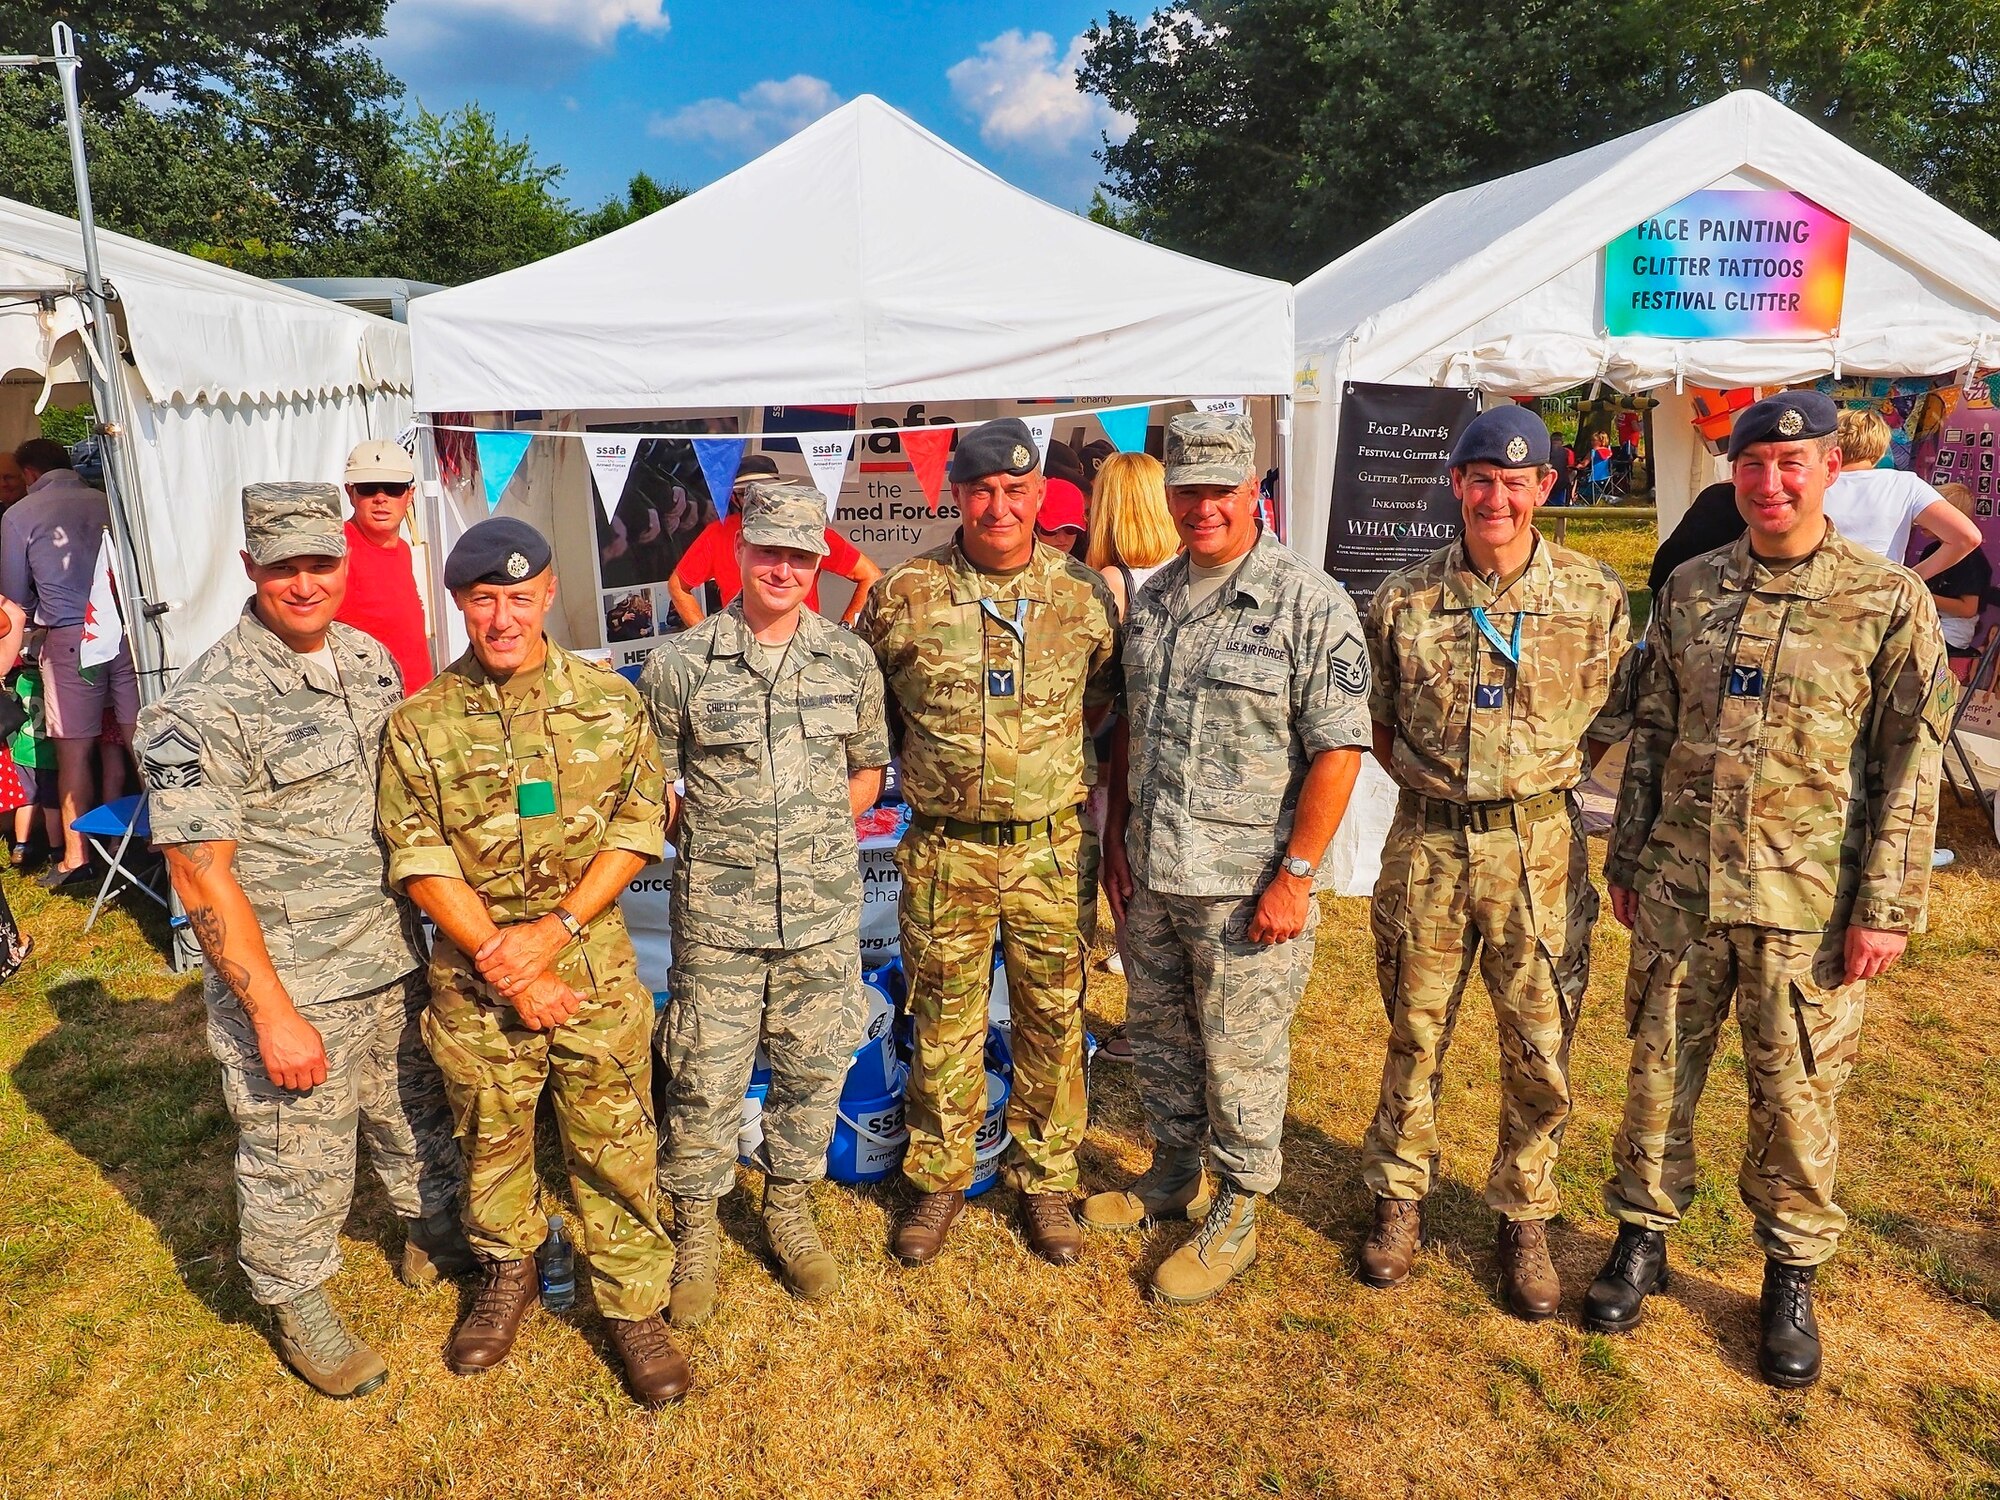 U.S. Air Force Staff Sgt. Jason Chipley (third from left), 145th Logistics Readiness Squadron, poses with members from the United States Air Force Reserves and Royal Air Force during Battle Proms at Hatfield Park, Hatfield, United Kingdom, July 14, 2018. The Military Reserve Exchange Program not only allows military members to learn and exchange ideas about their respective career fields, but it also provides the opportunity to be immersed in the host country’s culture.